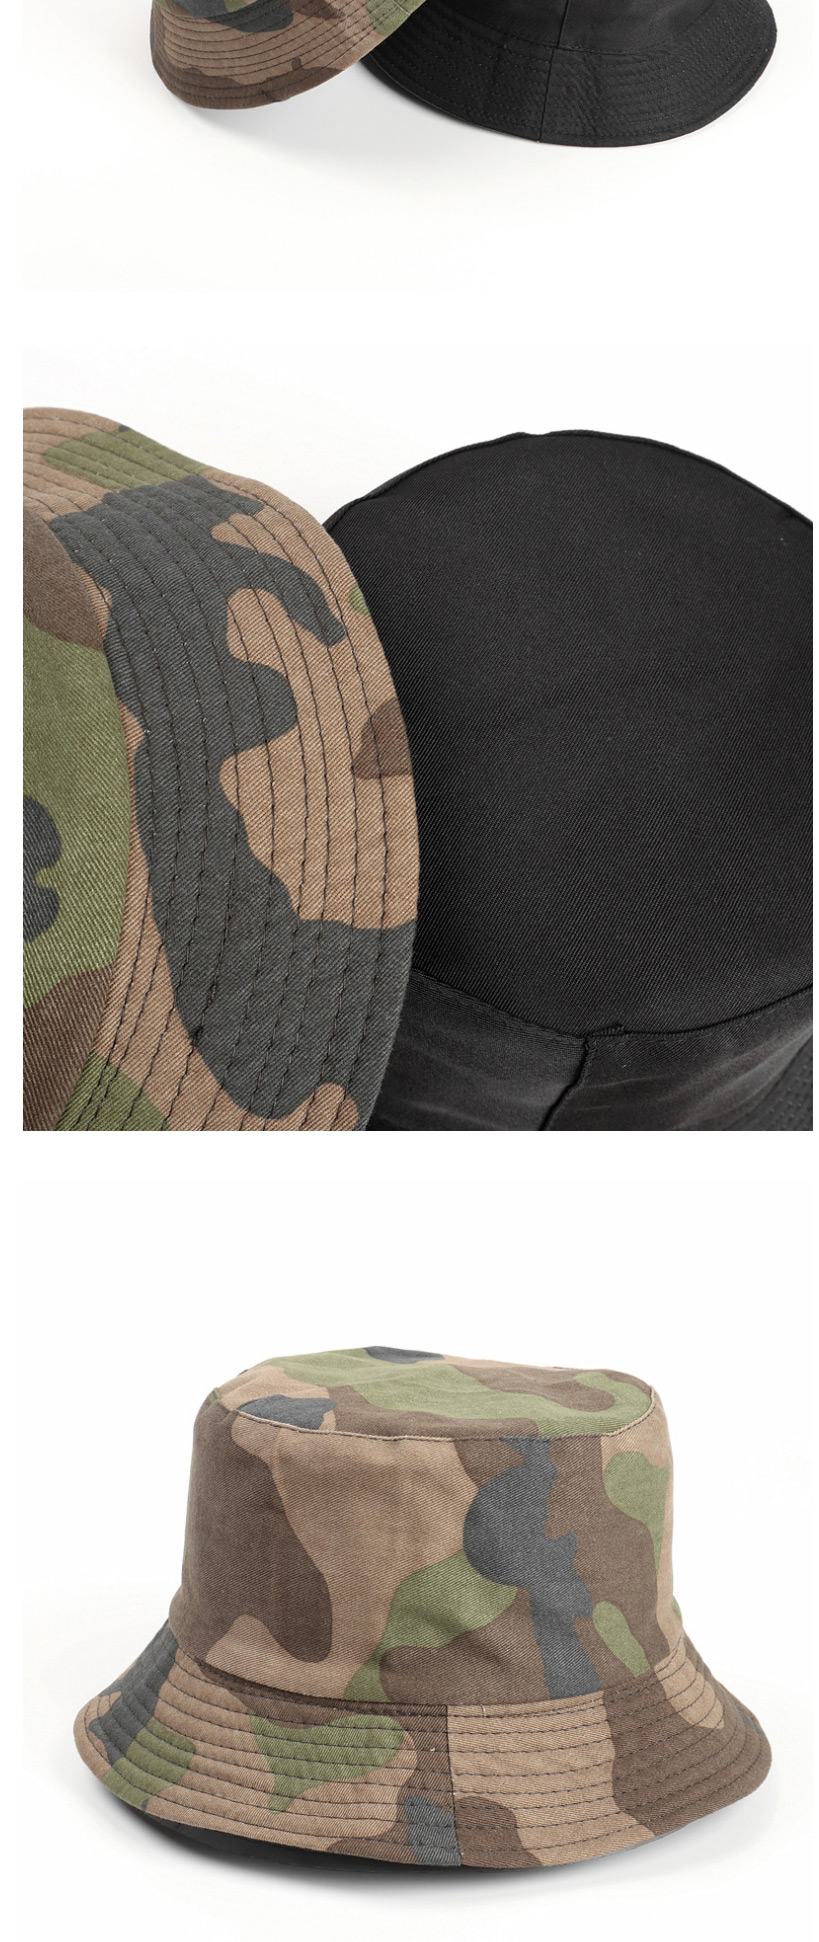 Fashion Polycotton Green Camouflage Double-sided Camouflage Sunscreen Fisherman Hat,Beanies&Others